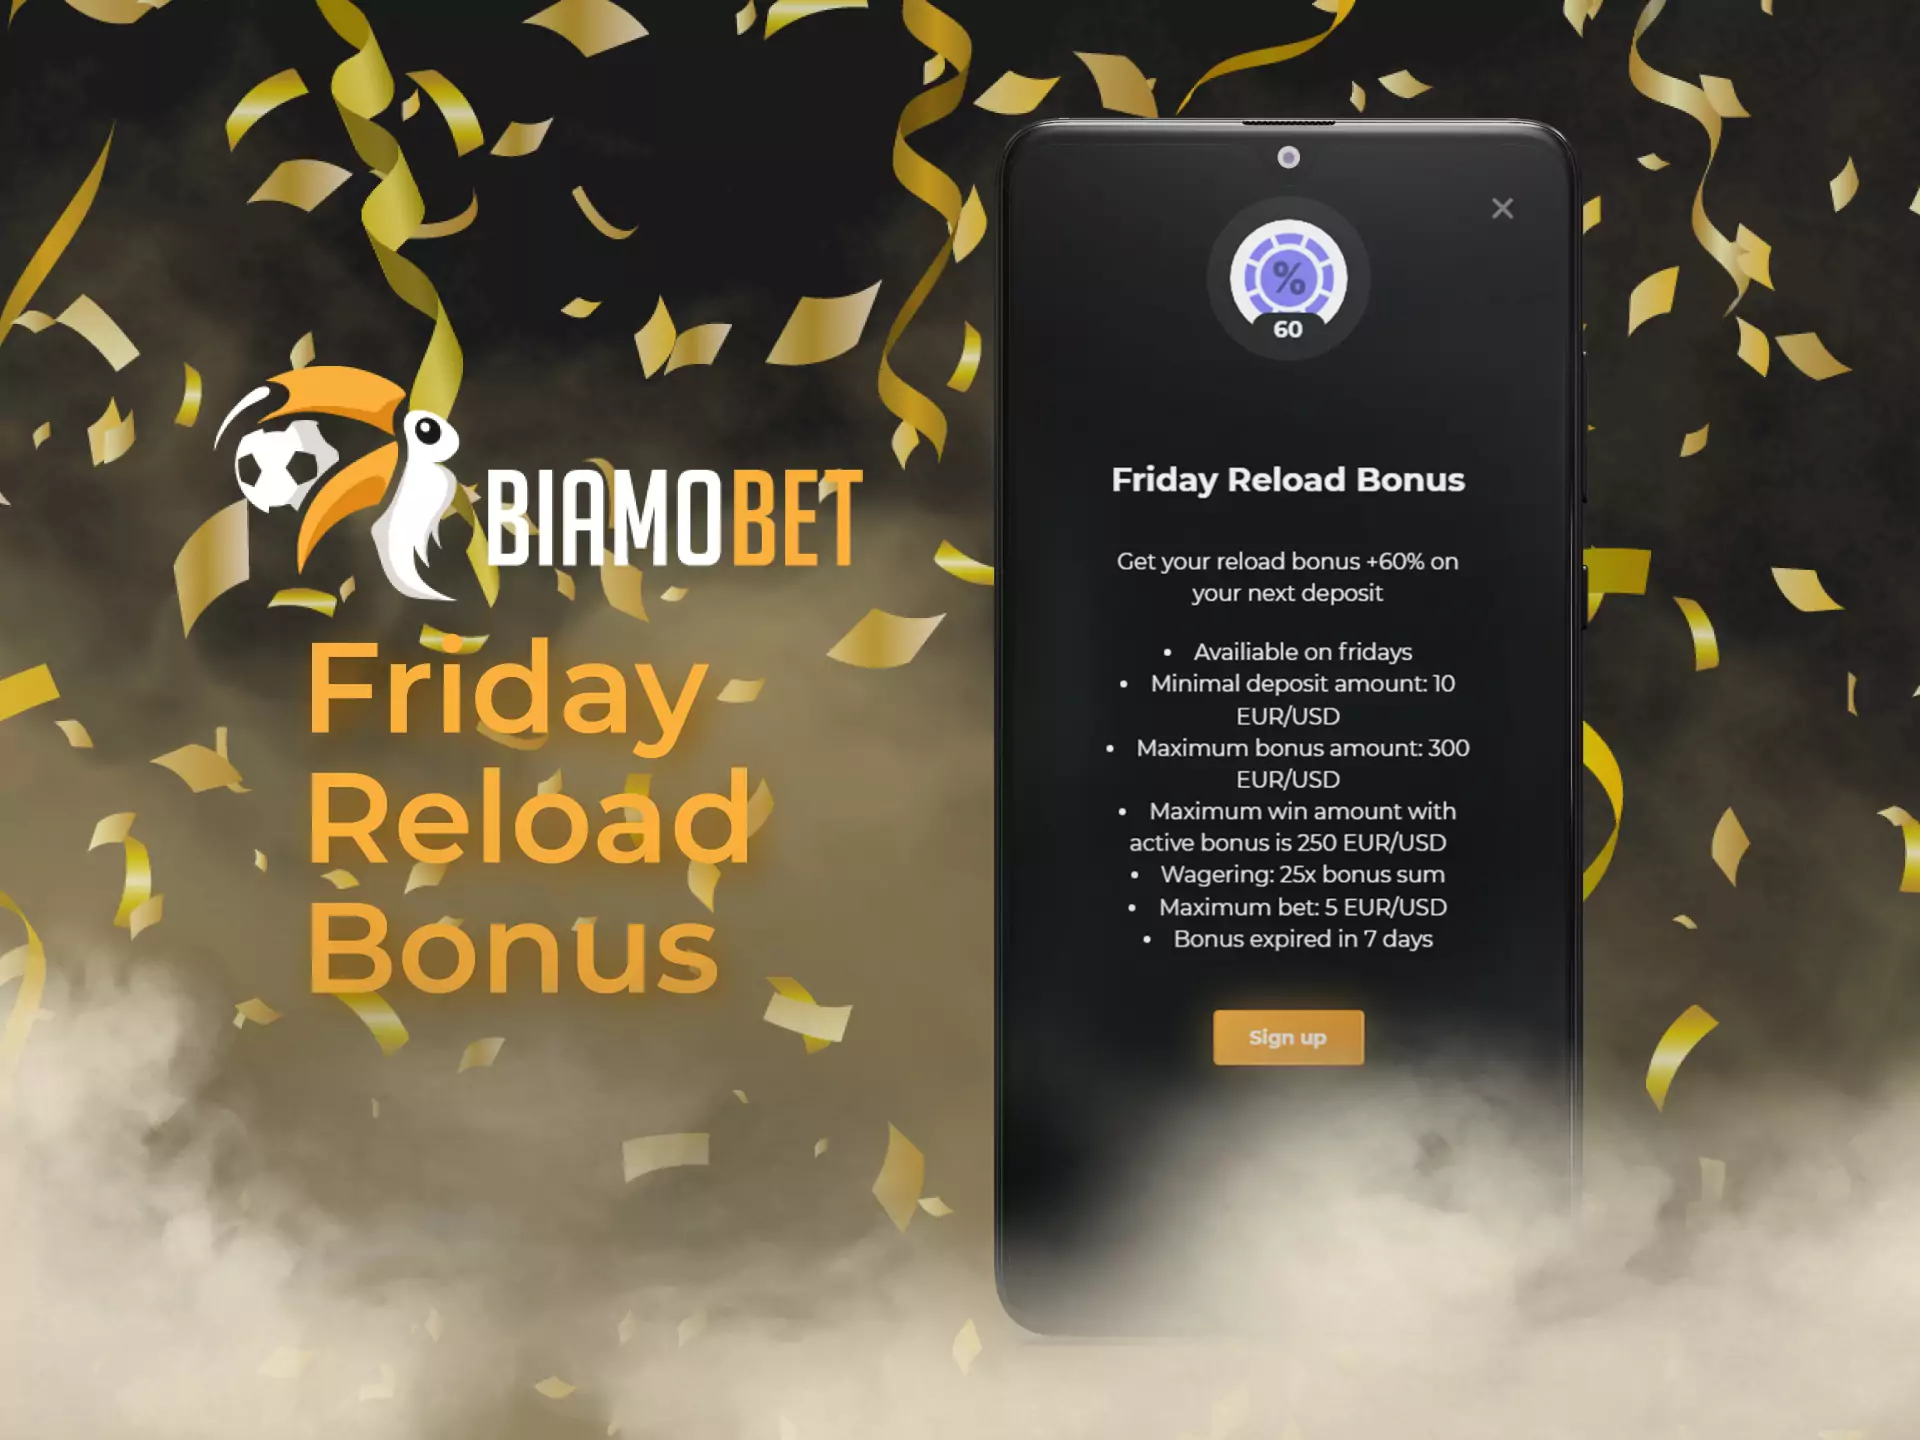 On Fridays, Biamobet gives additional bonuses to users making a deposit this day.